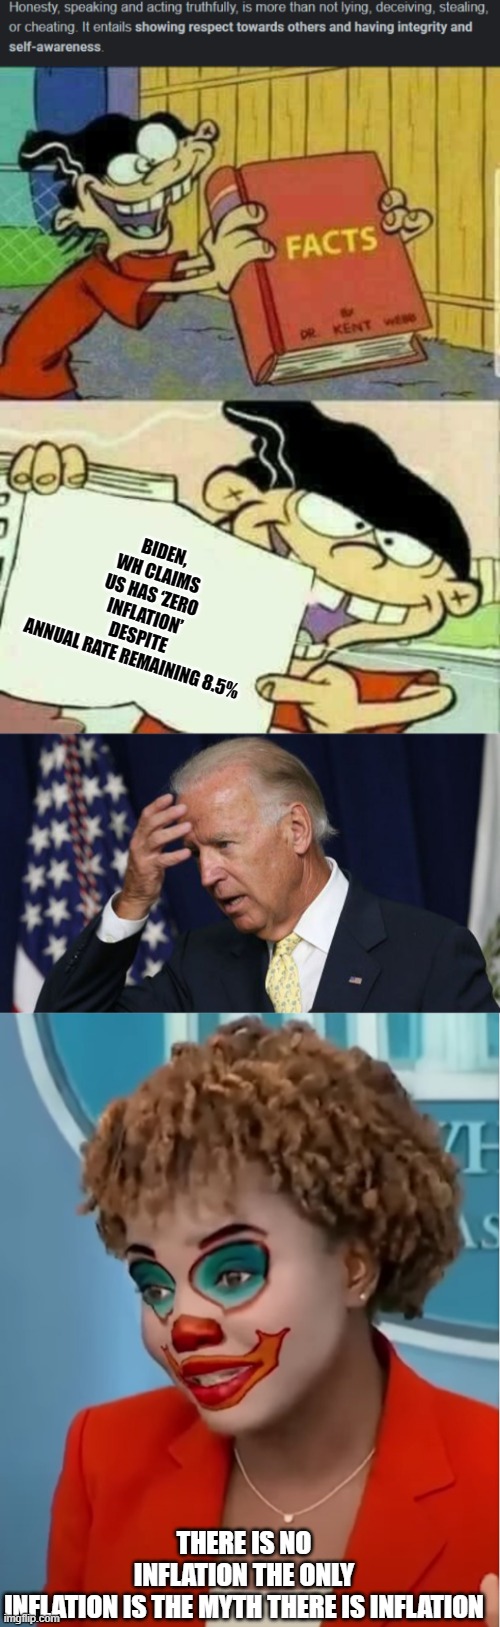 Honesty has left the building | BIDEN, WH CLAIMS US HAS ‘ZERO INFLATION’ DESPITE ANNUAL RATE REMAINING 8.5%; THERE IS NO INFLATION THE ONLY INFLATION IS THE MYTH THERE IS INFLATION | image tagged in double d facts book,joe biden worries,clown karine | made w/ Imgflip meme maker